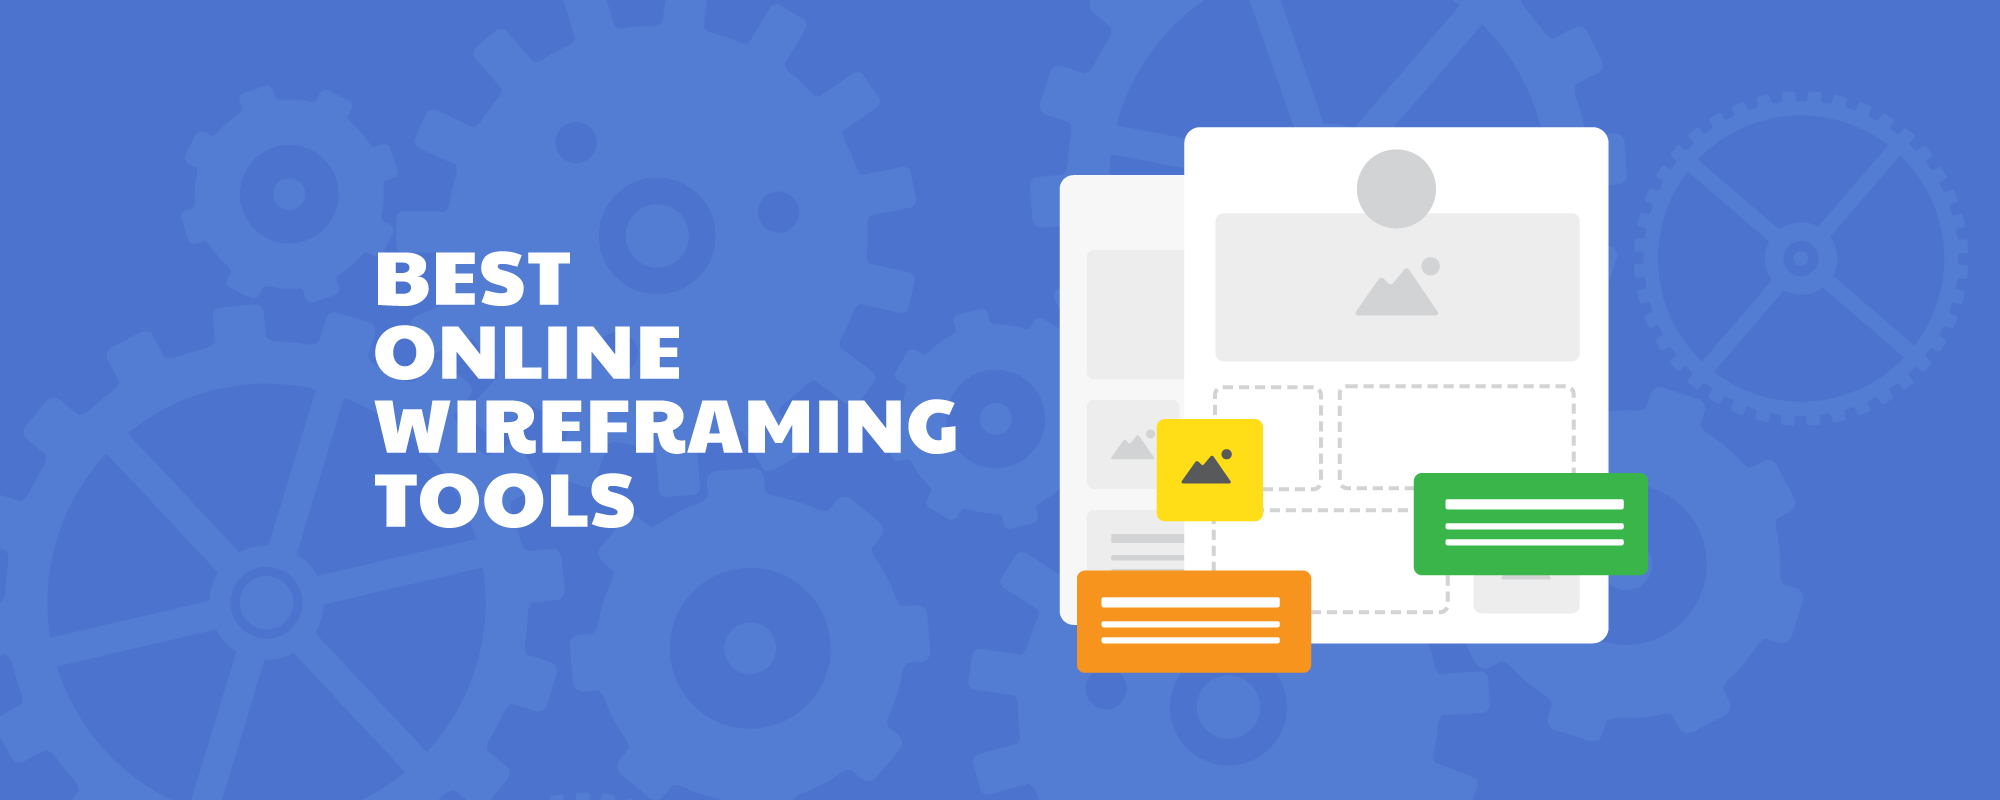 7 Free Online Wireframing Tools Adored by Pro Designers